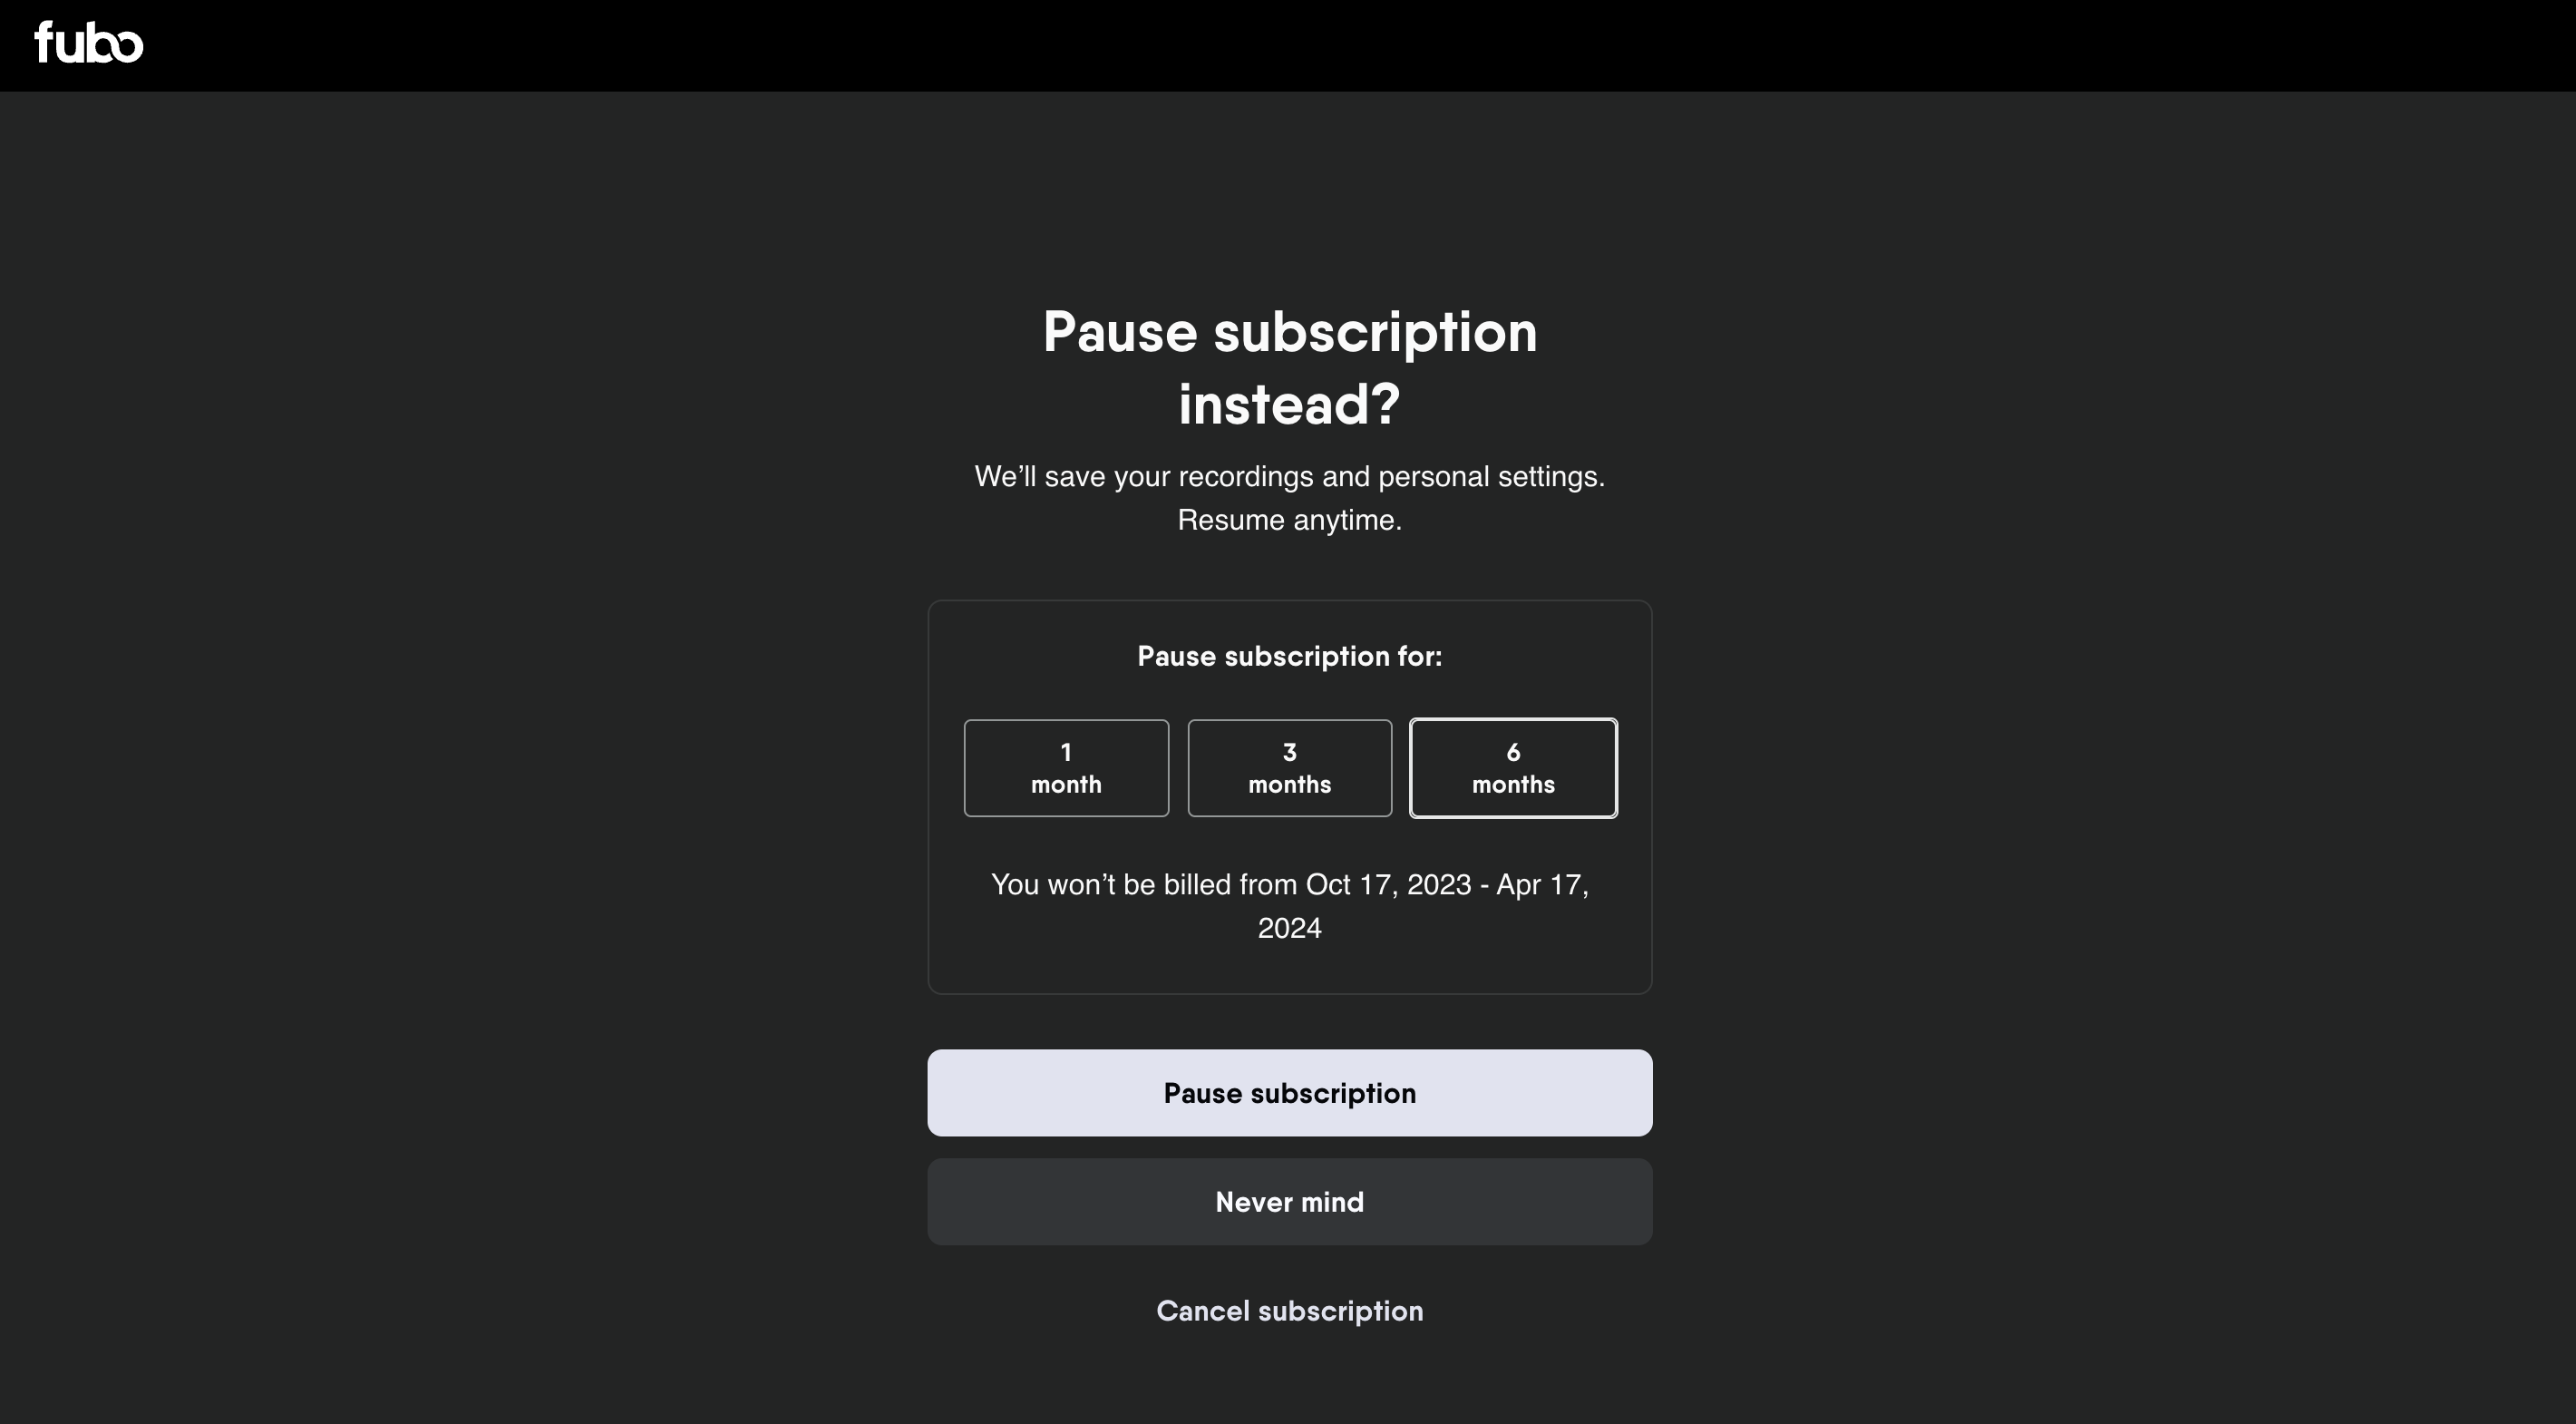 An offer to pause a FuboTV subscription temporarily instead of canceling